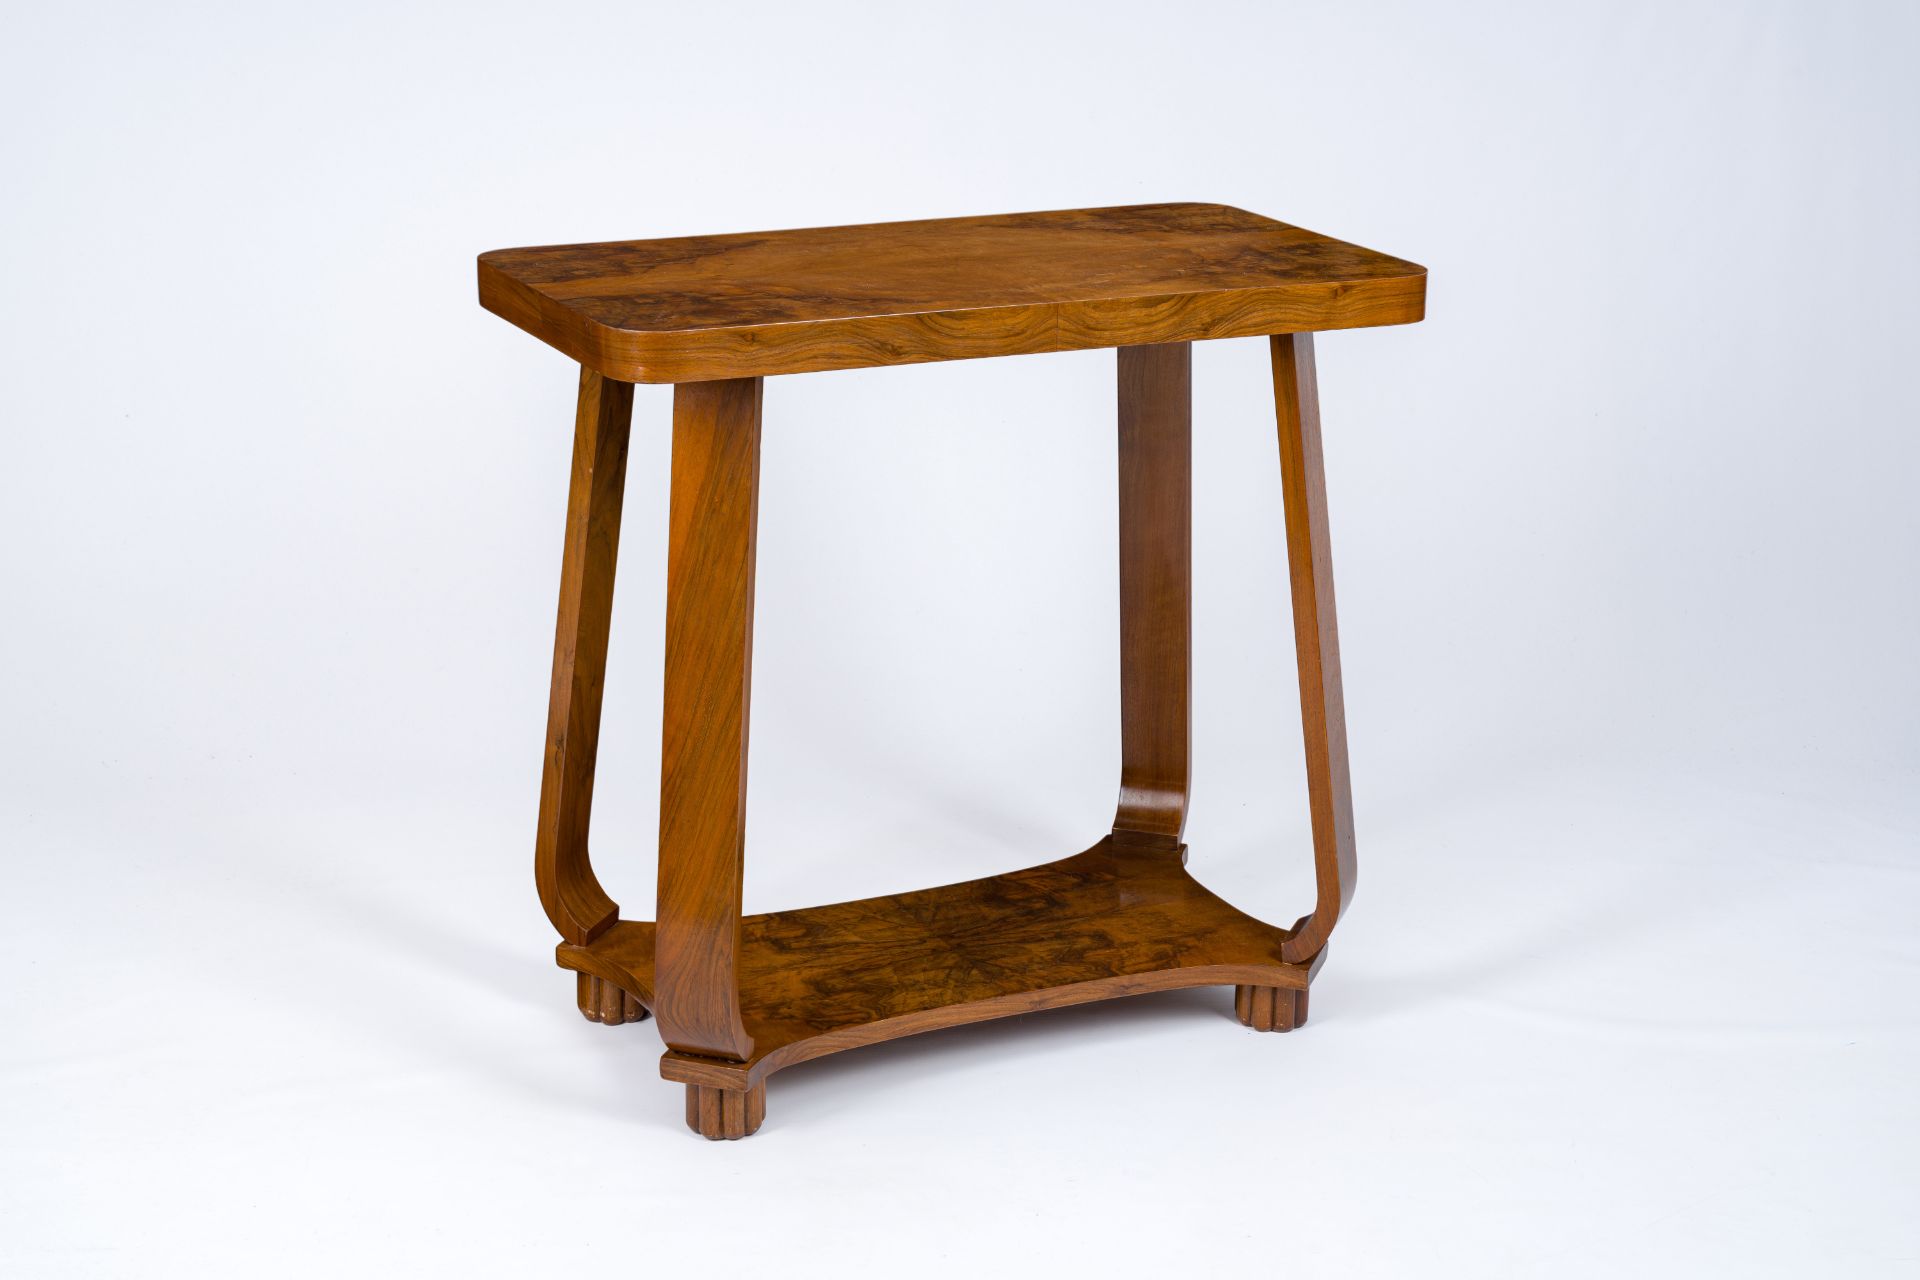 A French Art Deco walnut veneered side table, second quarter 20th C.